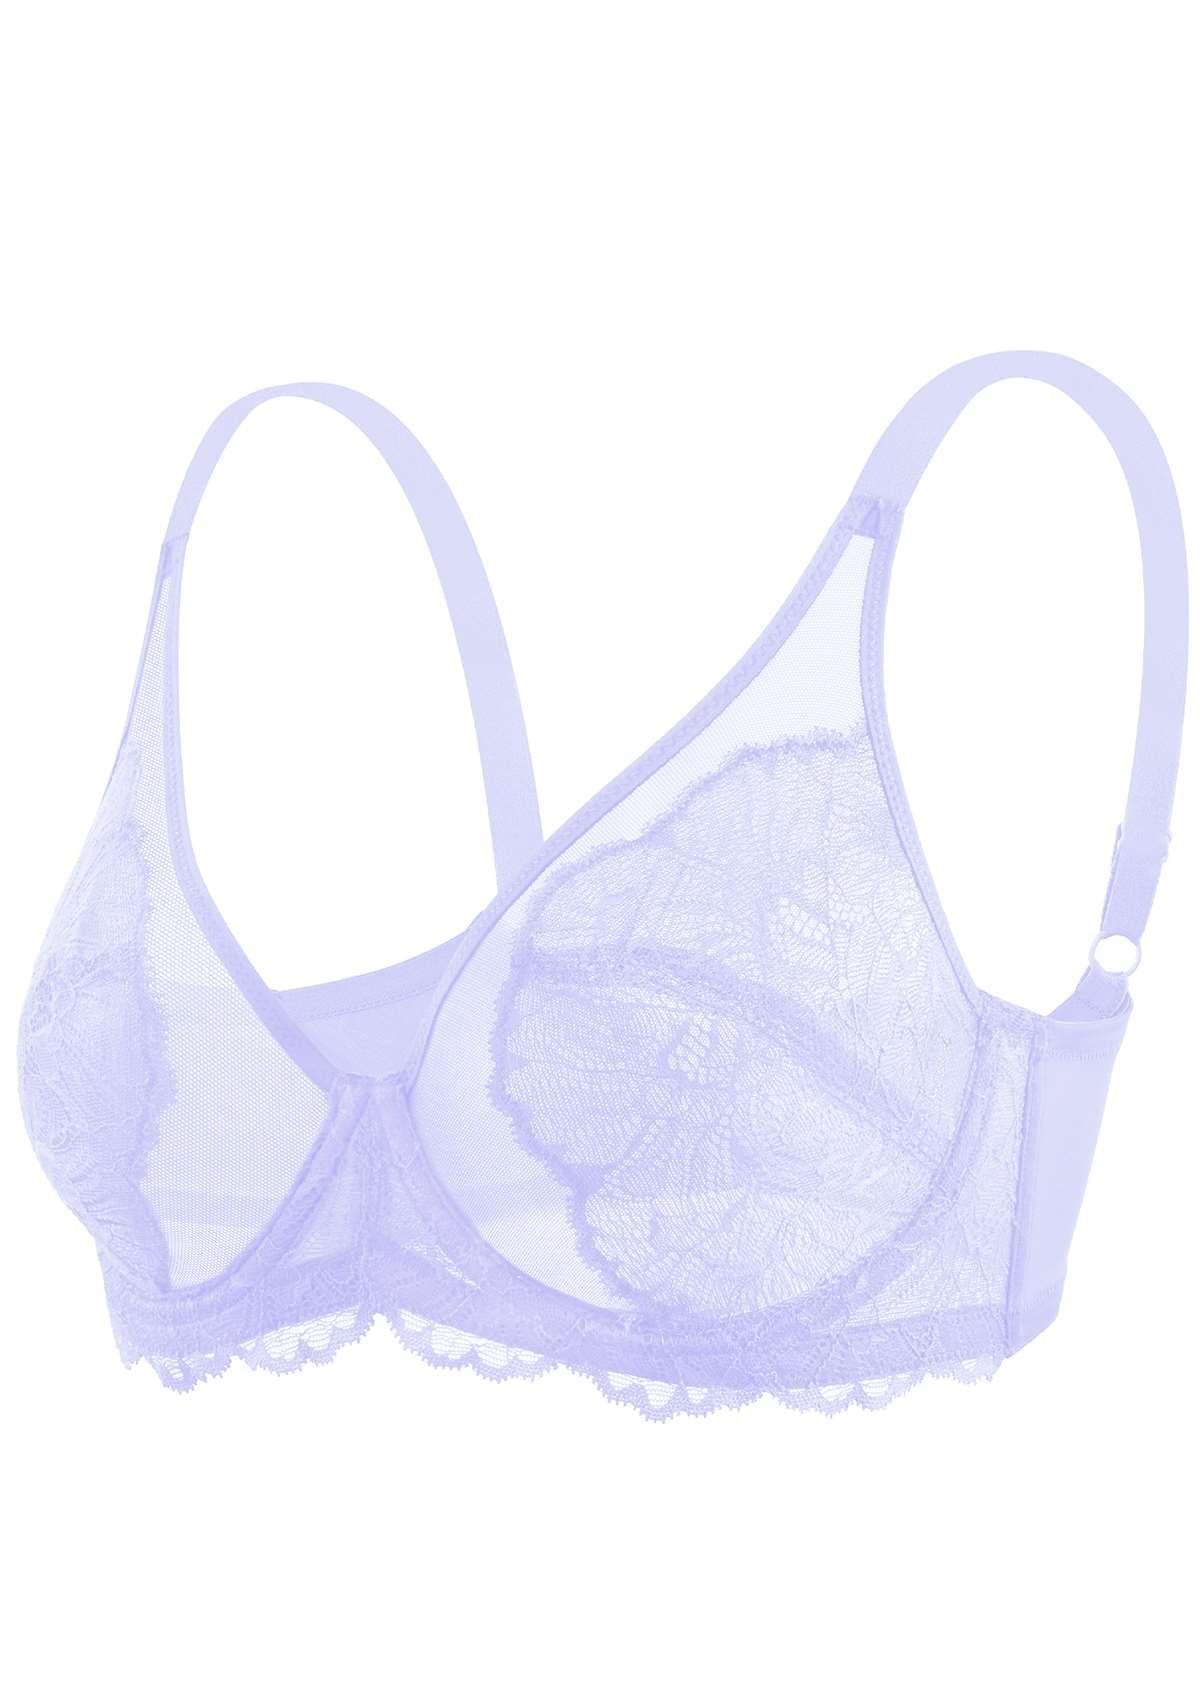 HSIA Blossom Transparent Lace Bra: Plus Size Wired Back Smoothing Bra - Purple / 34 / DD/E